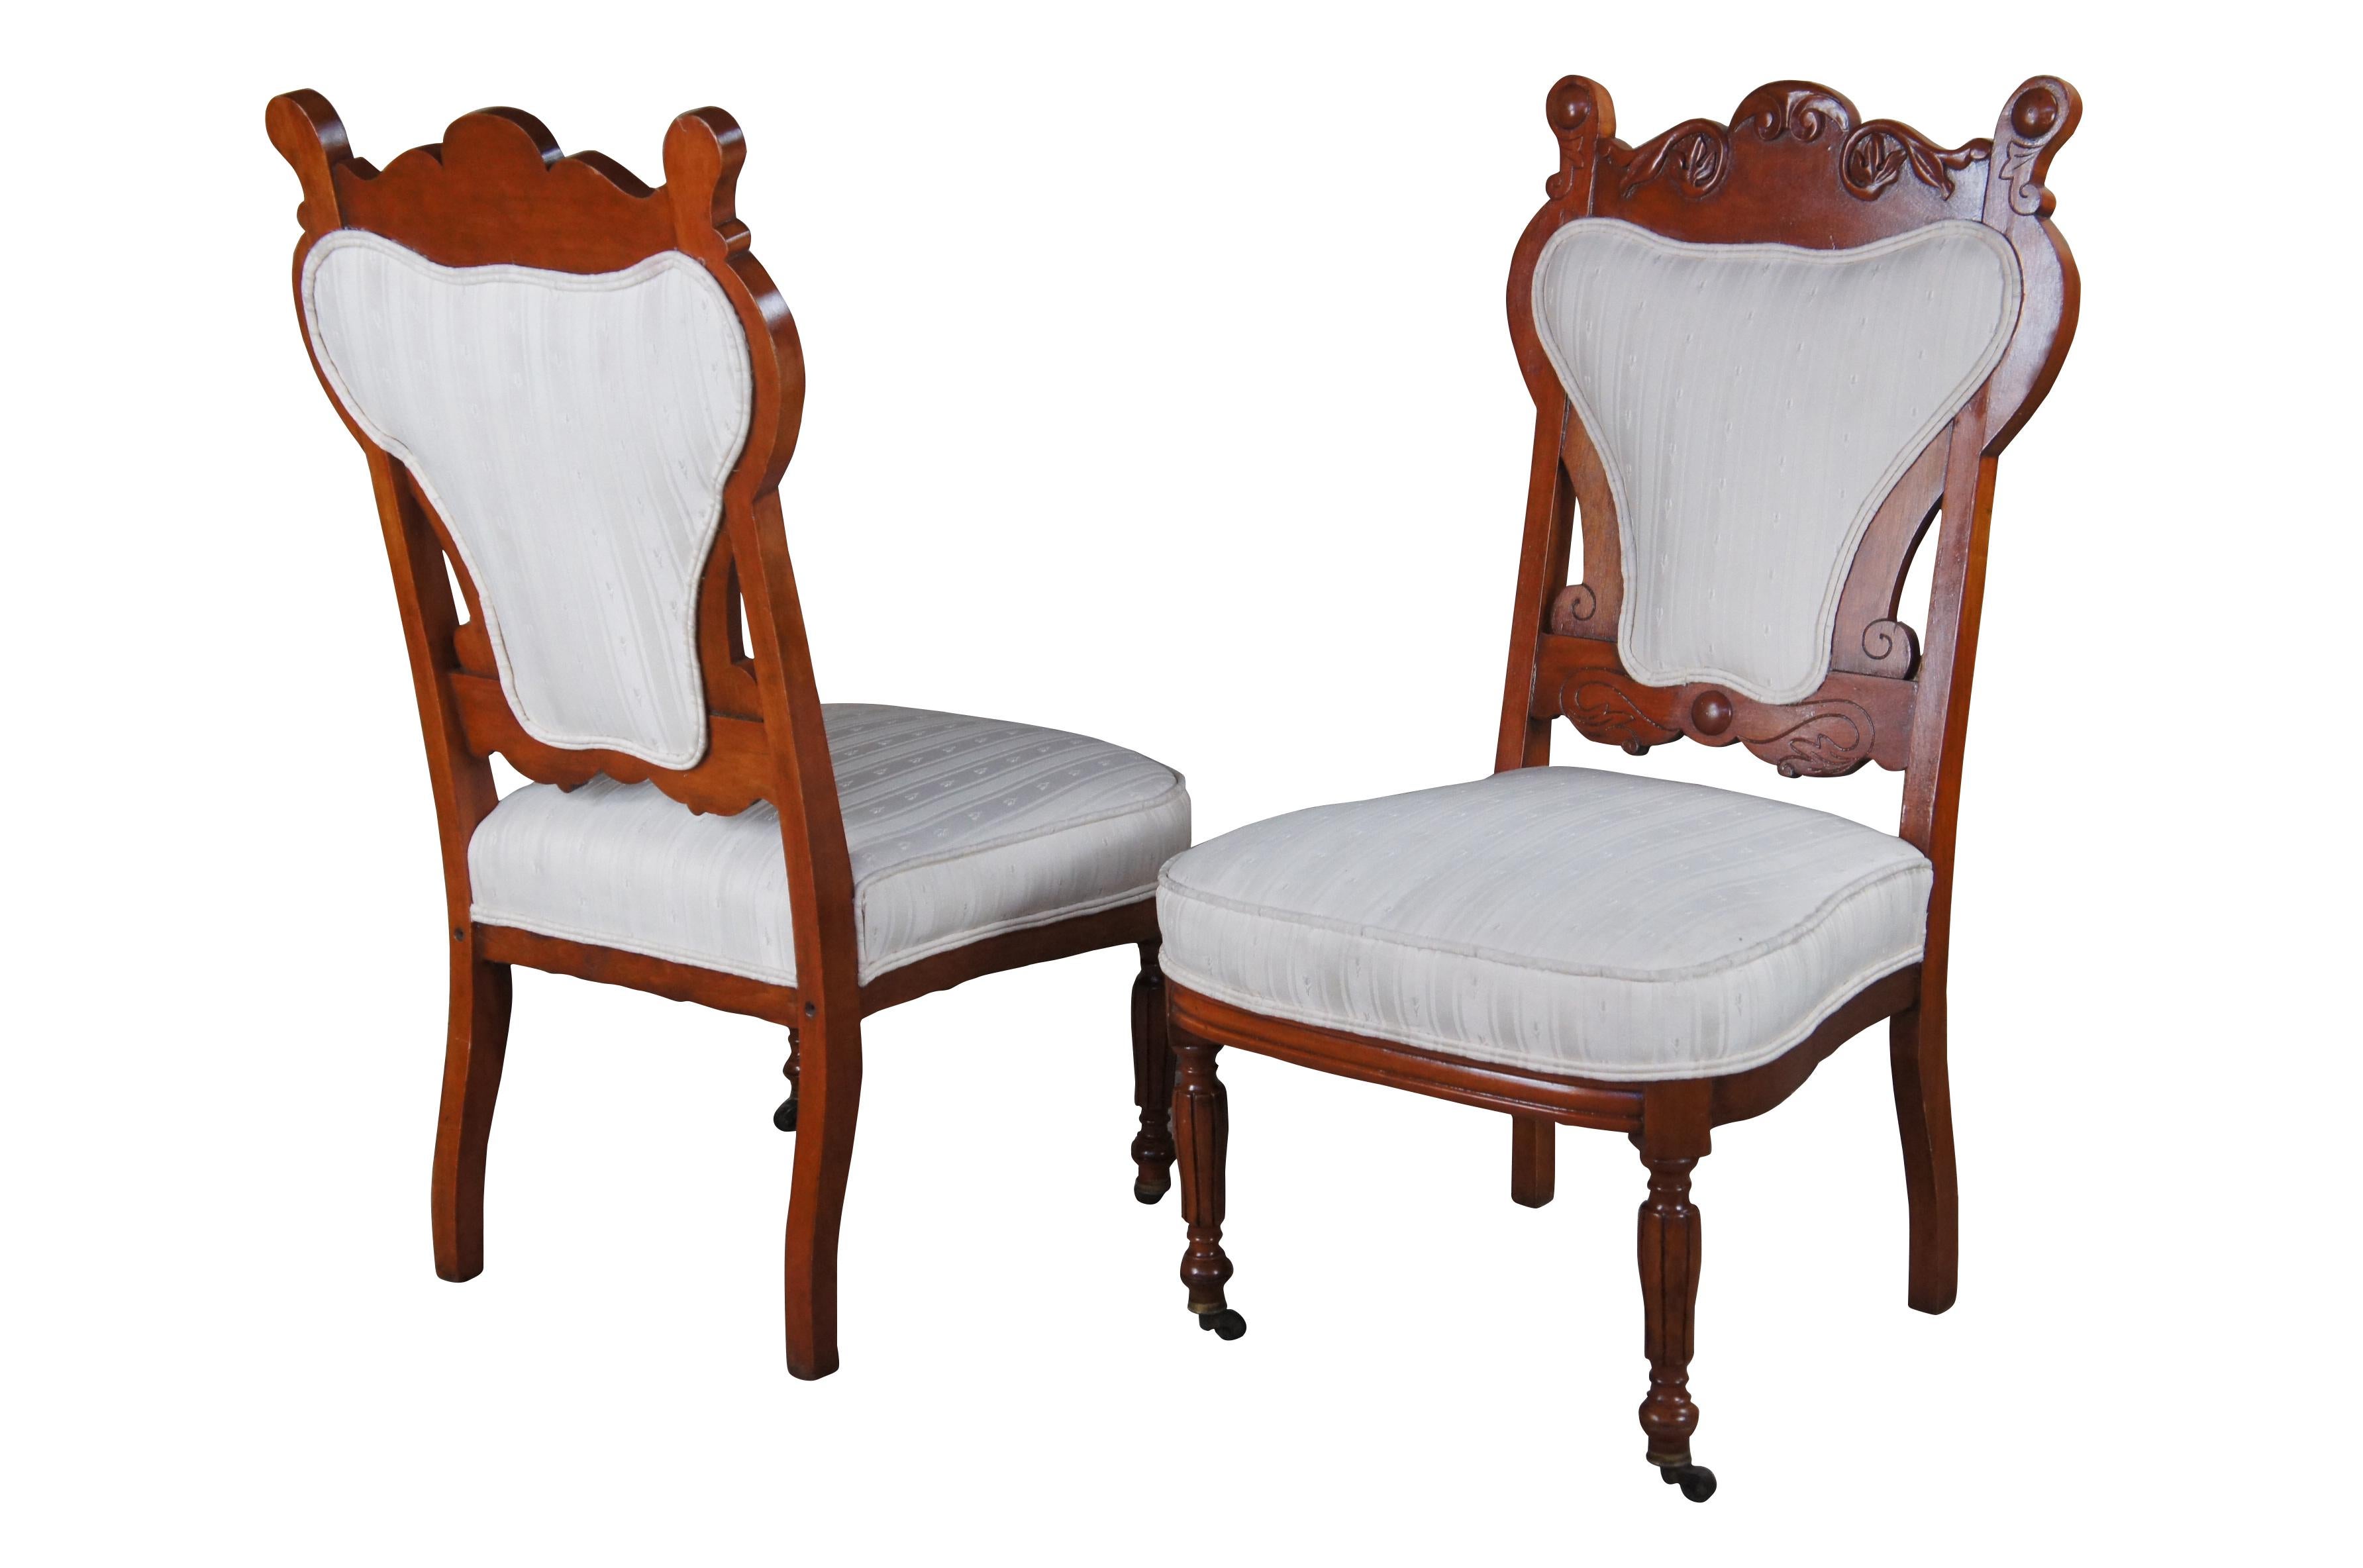 2 Antique Edwardian Carved Mahogany Parlor Balloon Back Dining Side Chairs Pair In Good Condition For Sale In Dayton, OH